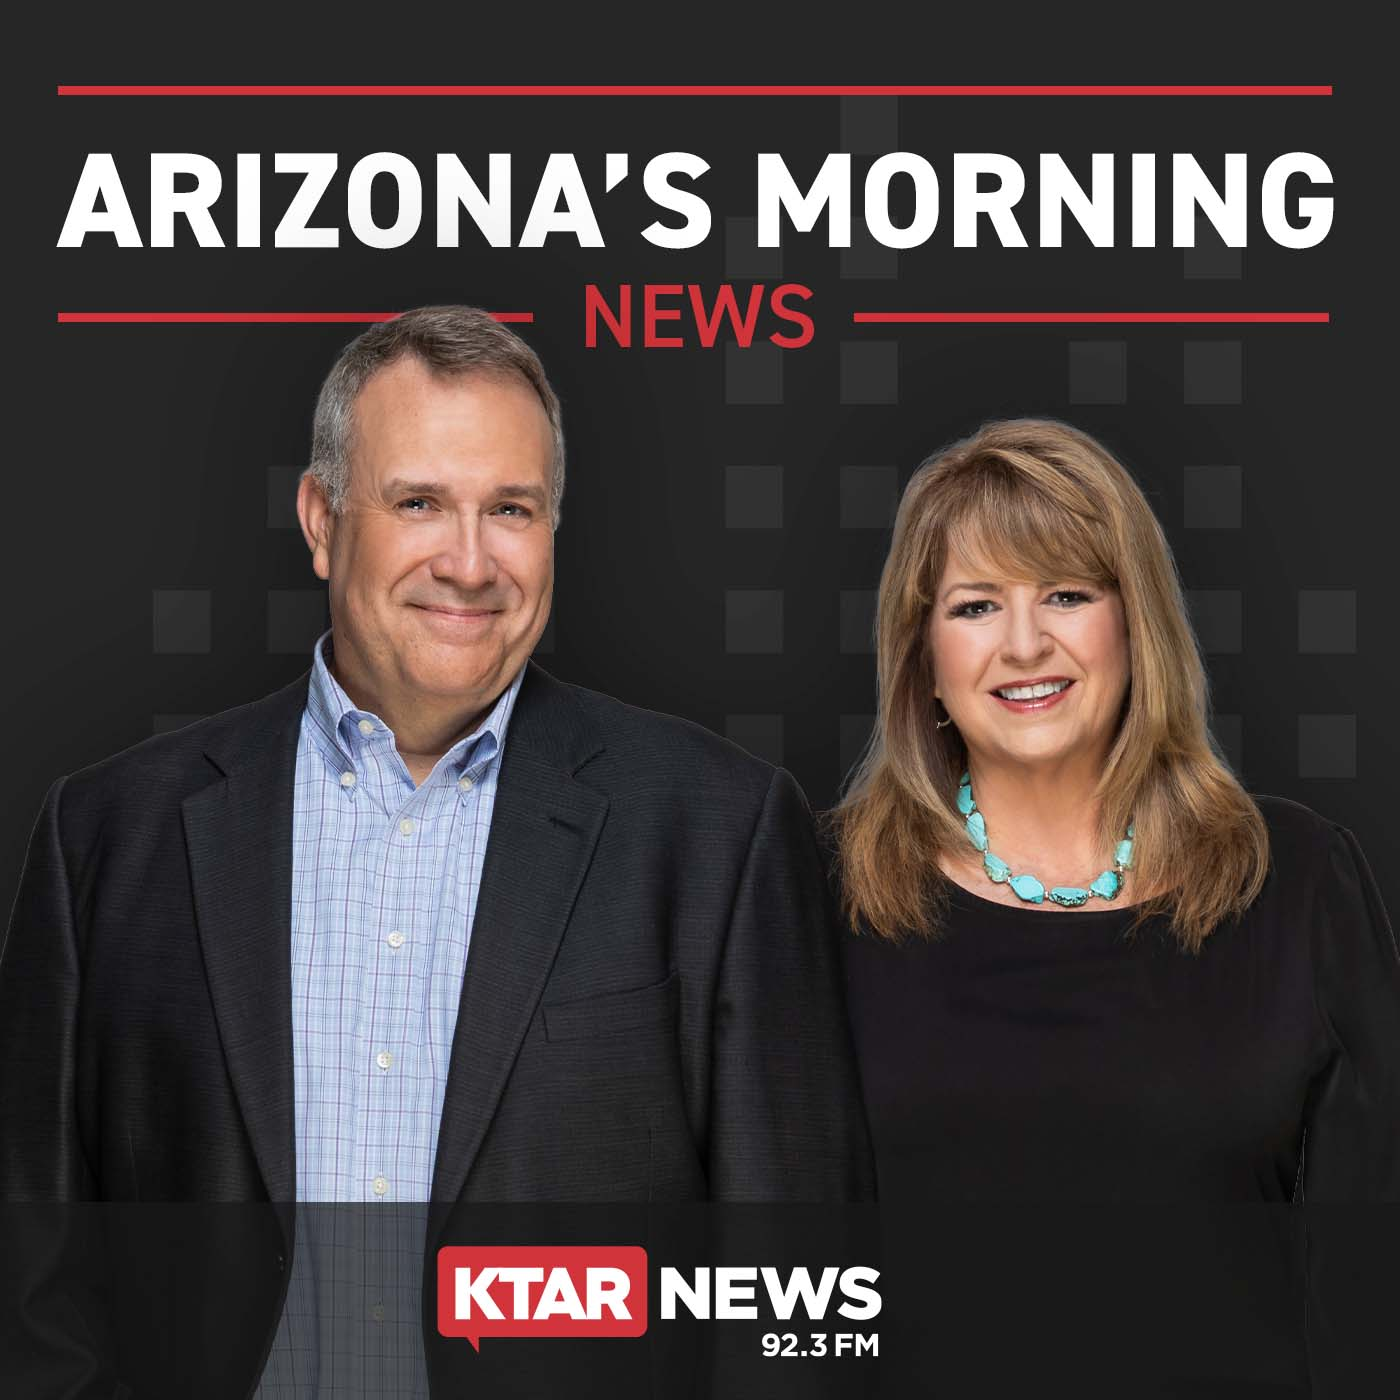 Sharper Point Commentary - Arizona prisoners could get out of jail early